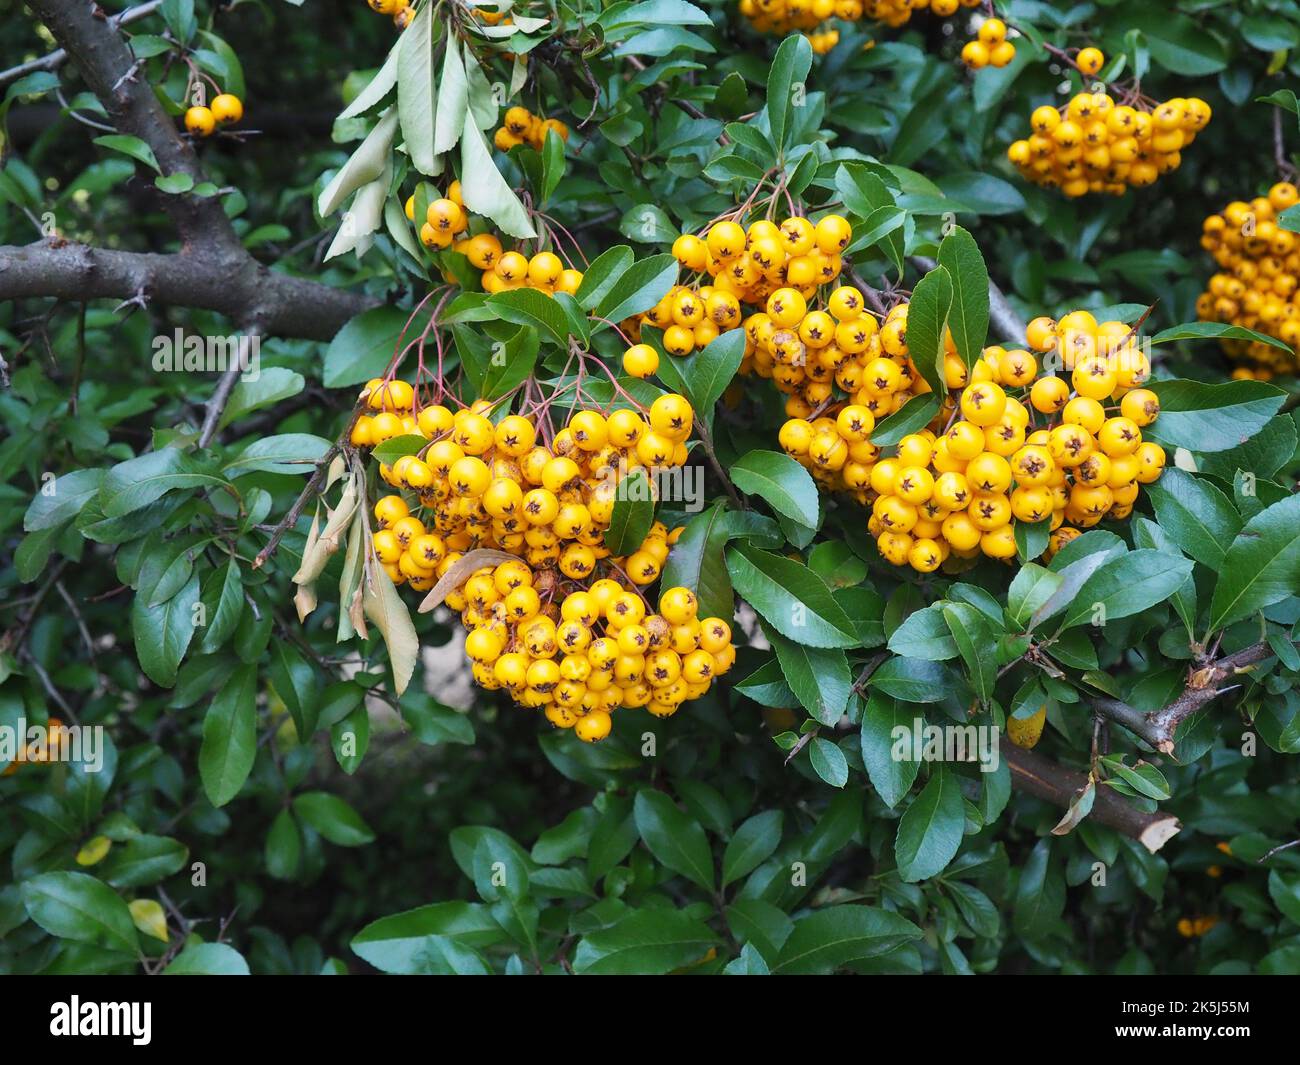 Orange berries and green leaves of the pyracantha coccinea or the scarlet firethorn plant. It is the European species of firethorn. Stock Photo